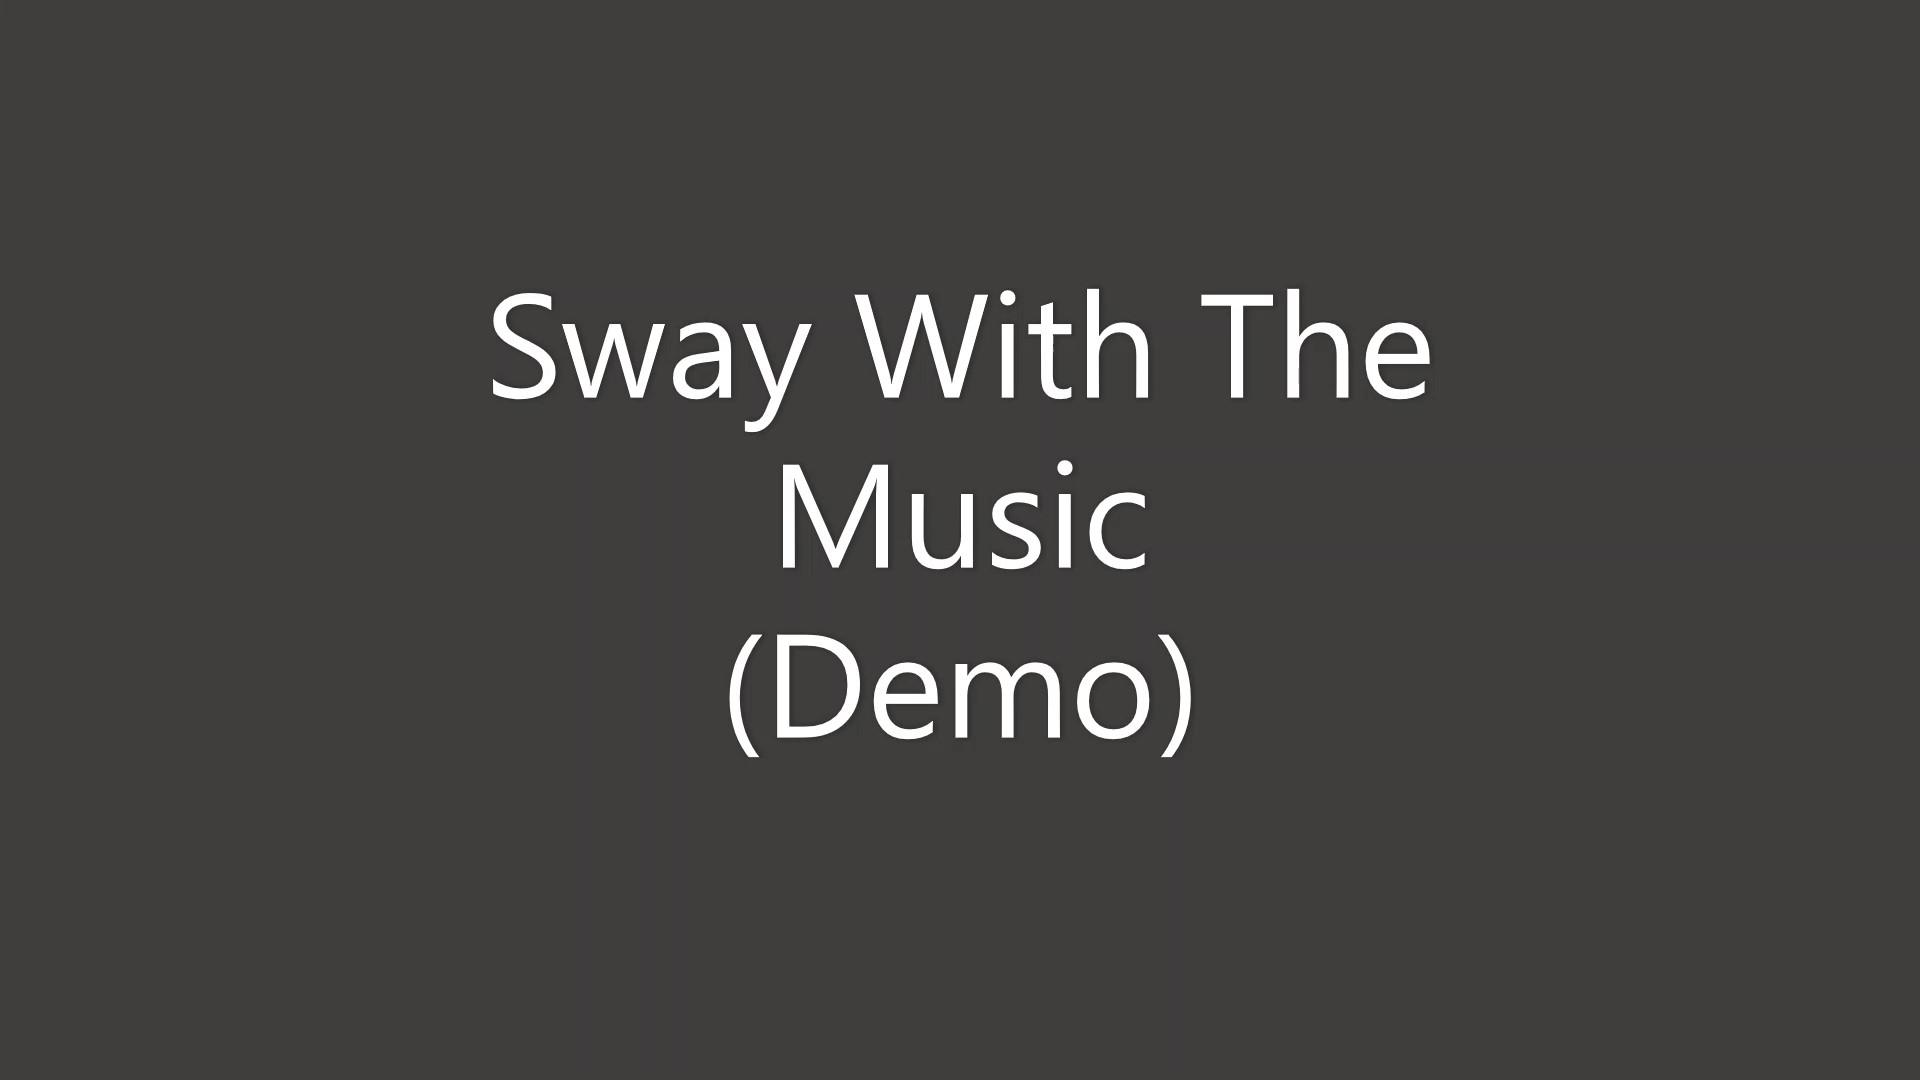 Sway With The Music Demo